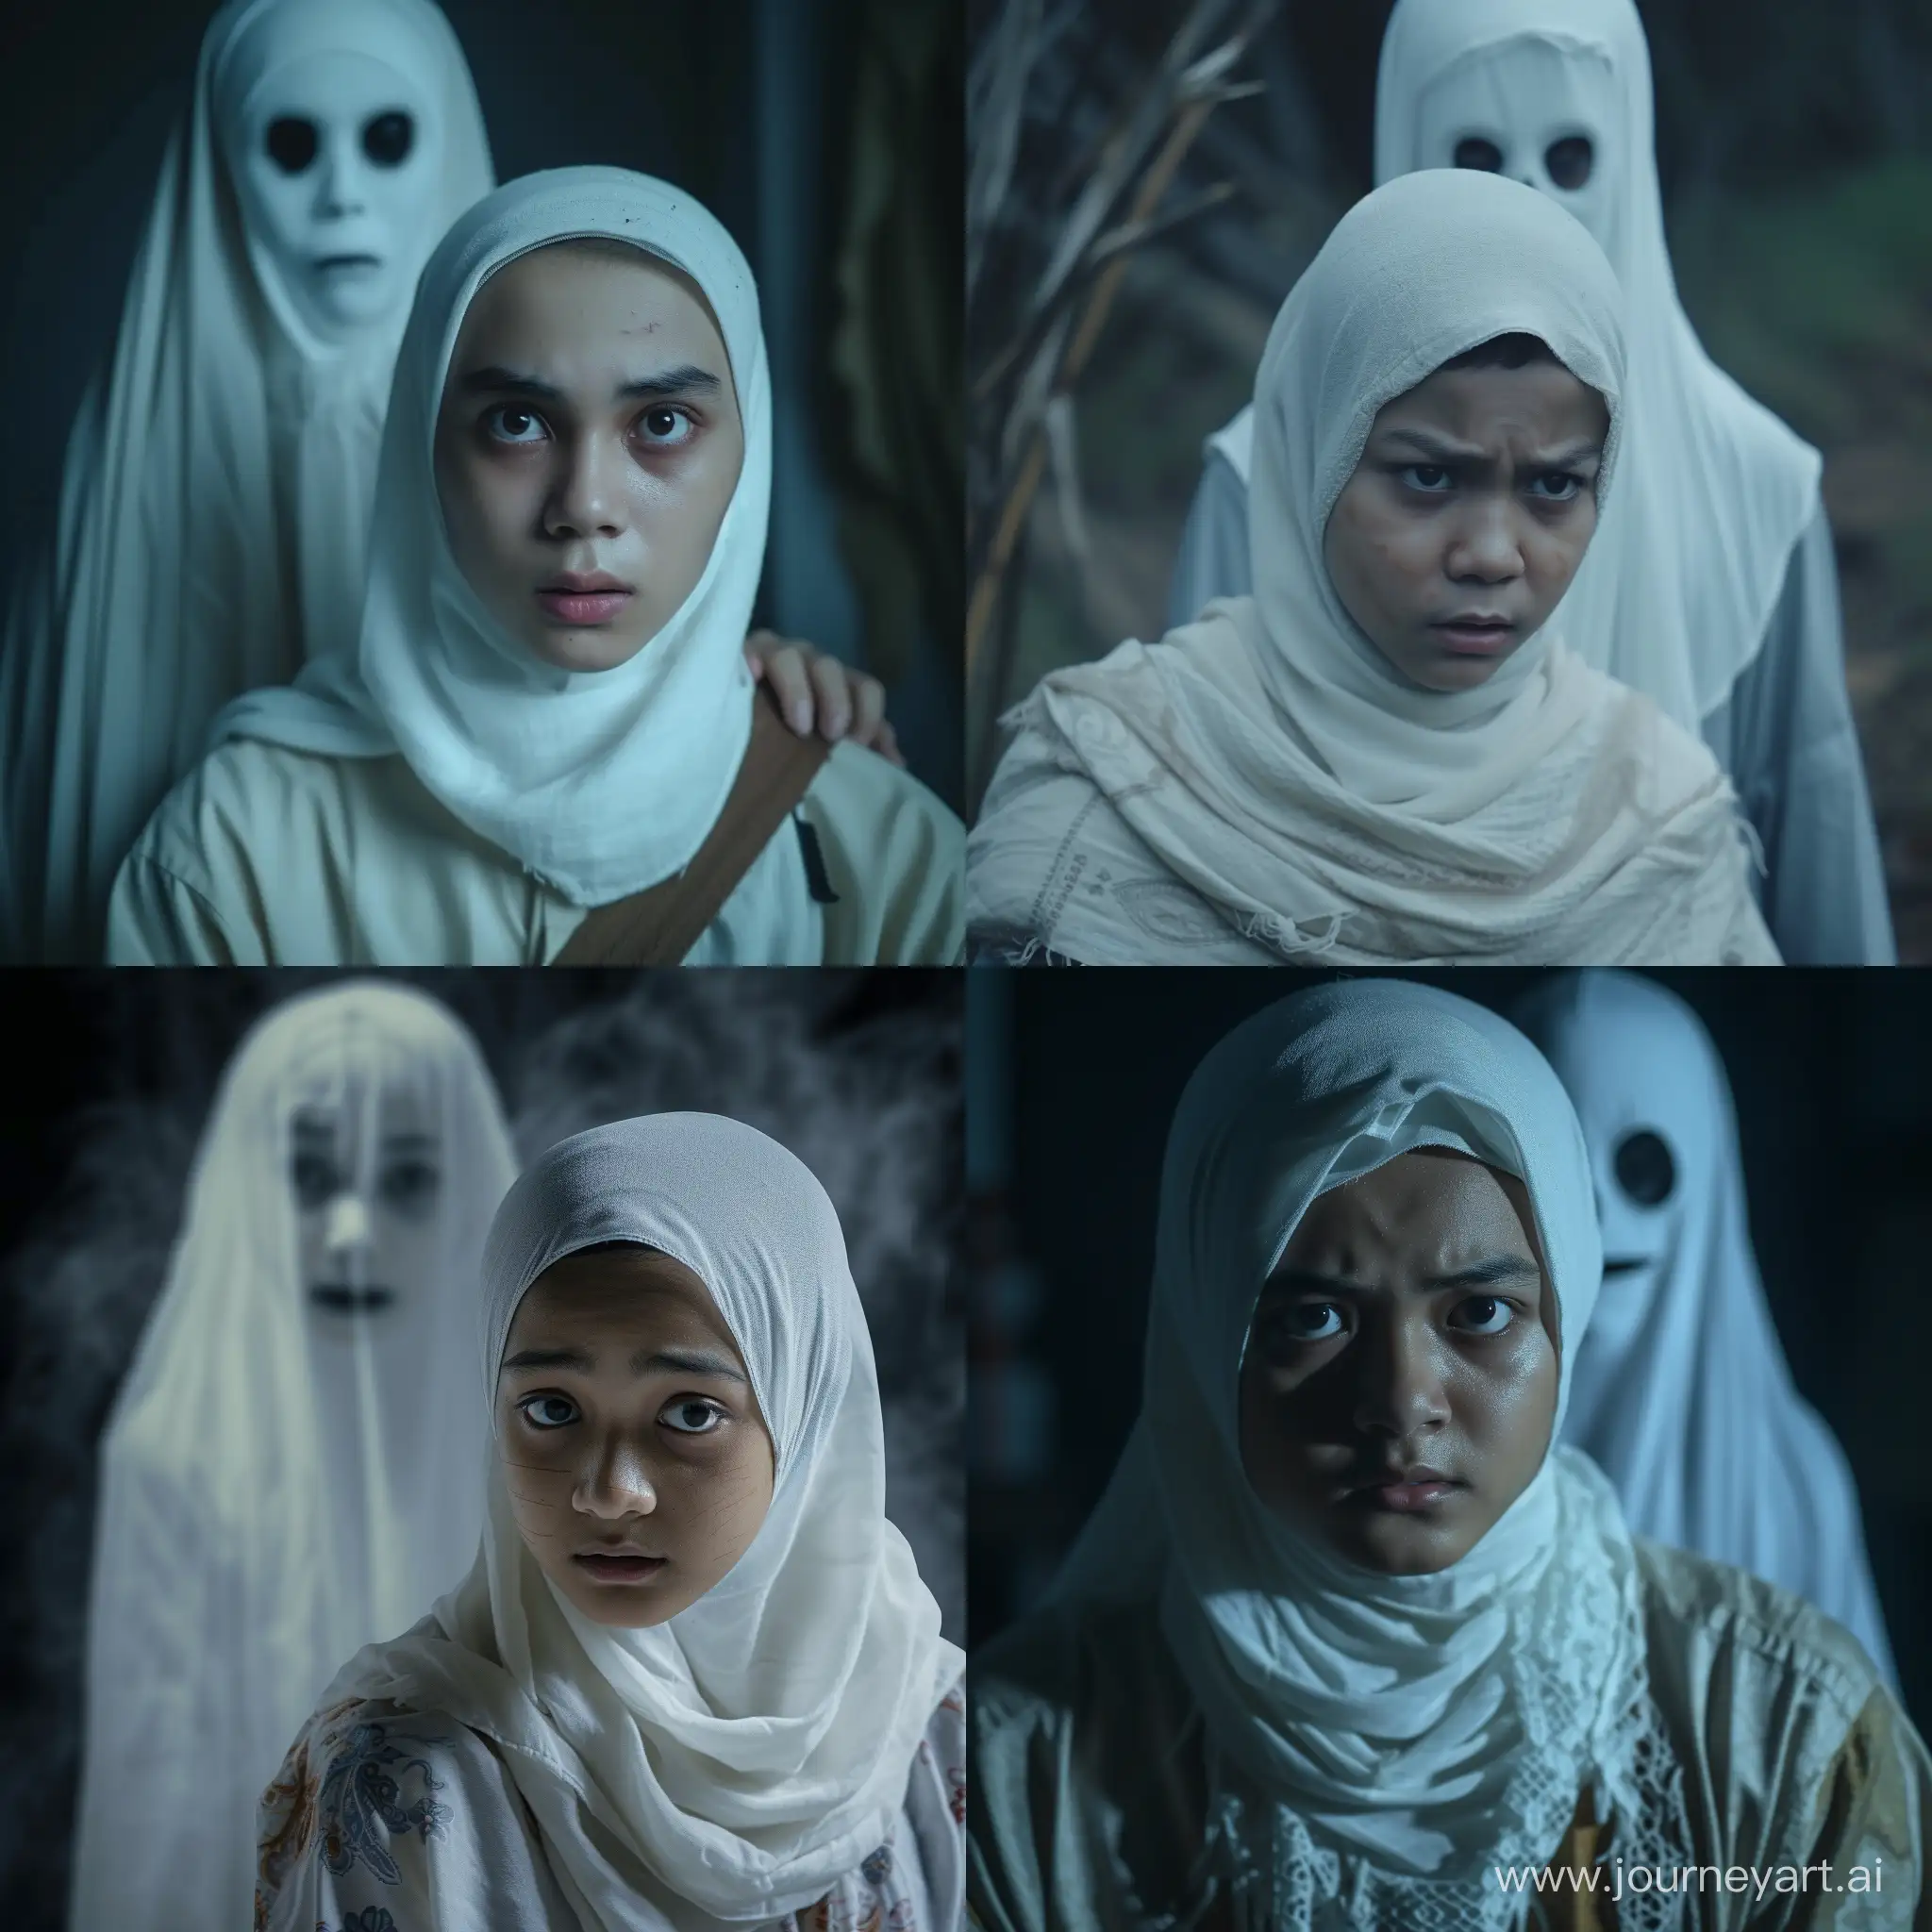 A 29 years old young indonesian girl wearing a white head and neck covering with a white hijab. He looked frightened with his gaze facing downwards and his eyes downcast. There was a white ghost figure behind him with a scary face, movie horor scene 